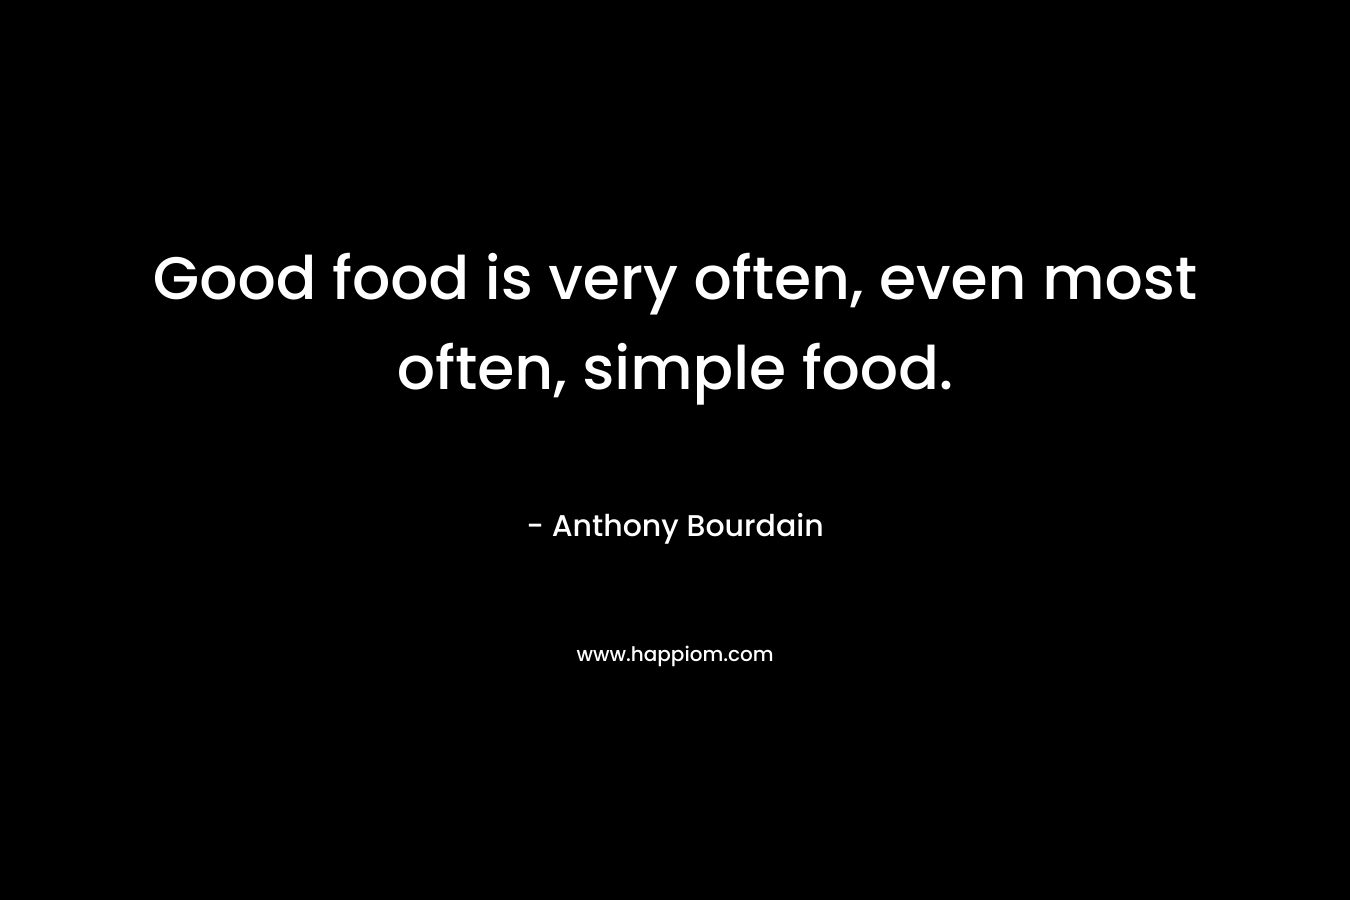 Good food is very often, even most often, simple food.